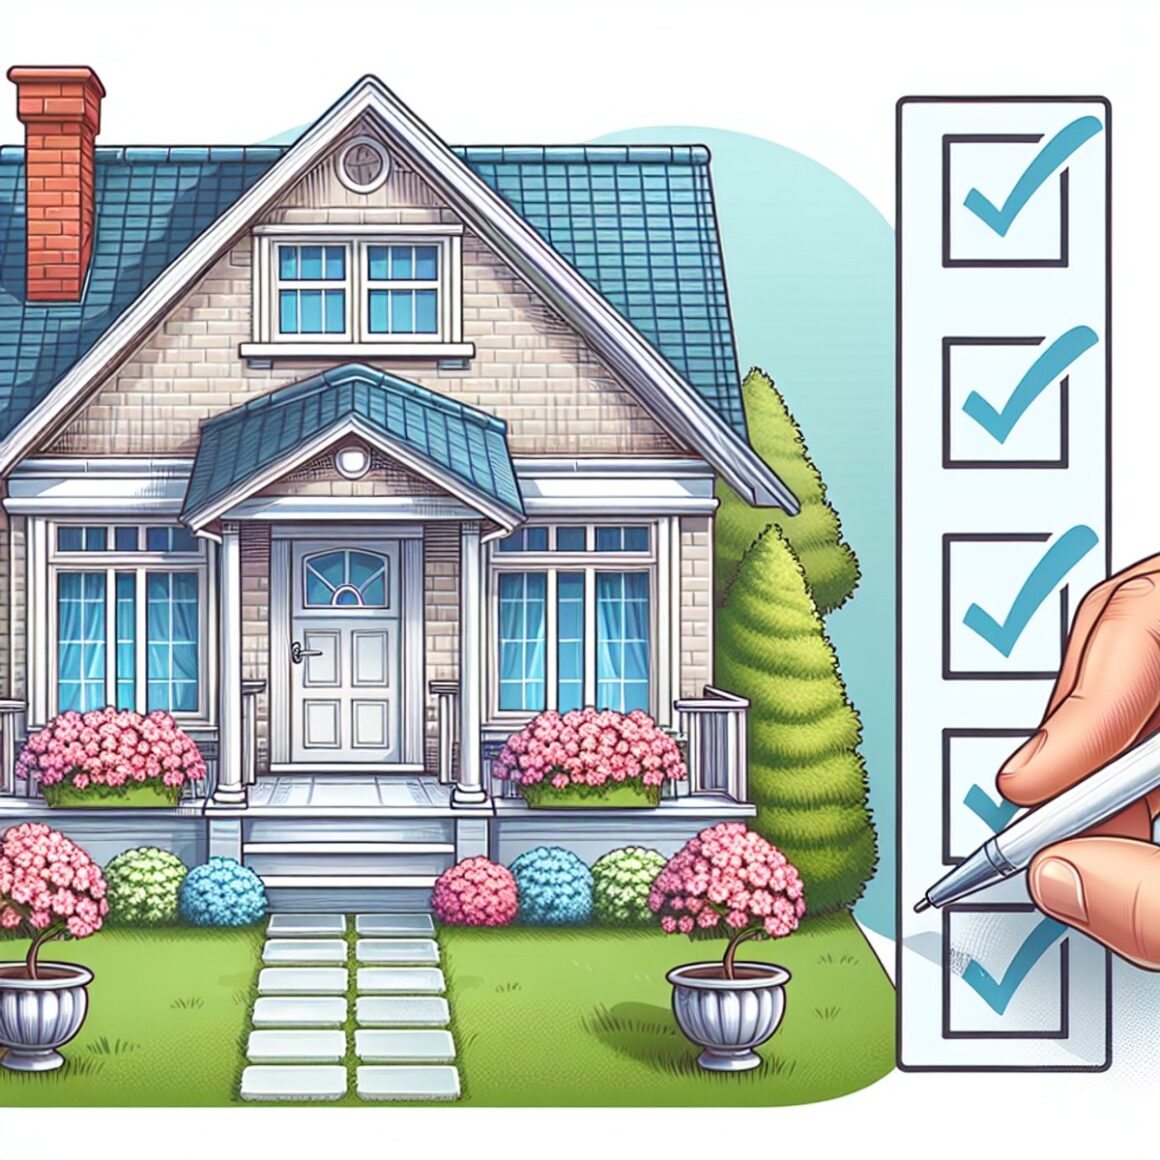 Perpetual Checklist for Maintaining a Sell-Ready Home